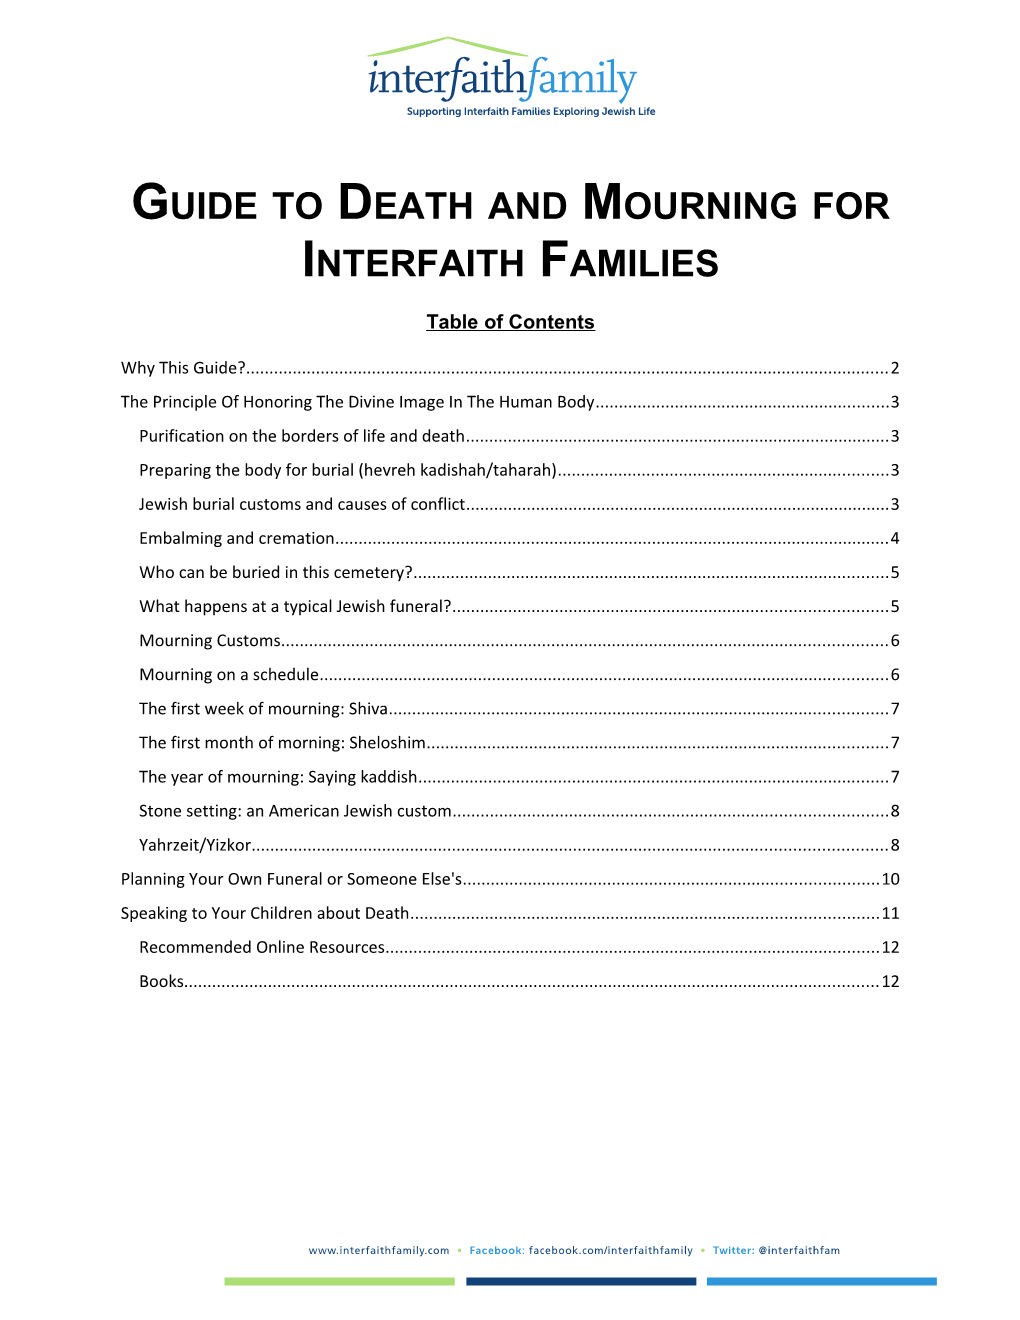 Guide to Death and Mourning for Interfaith Families